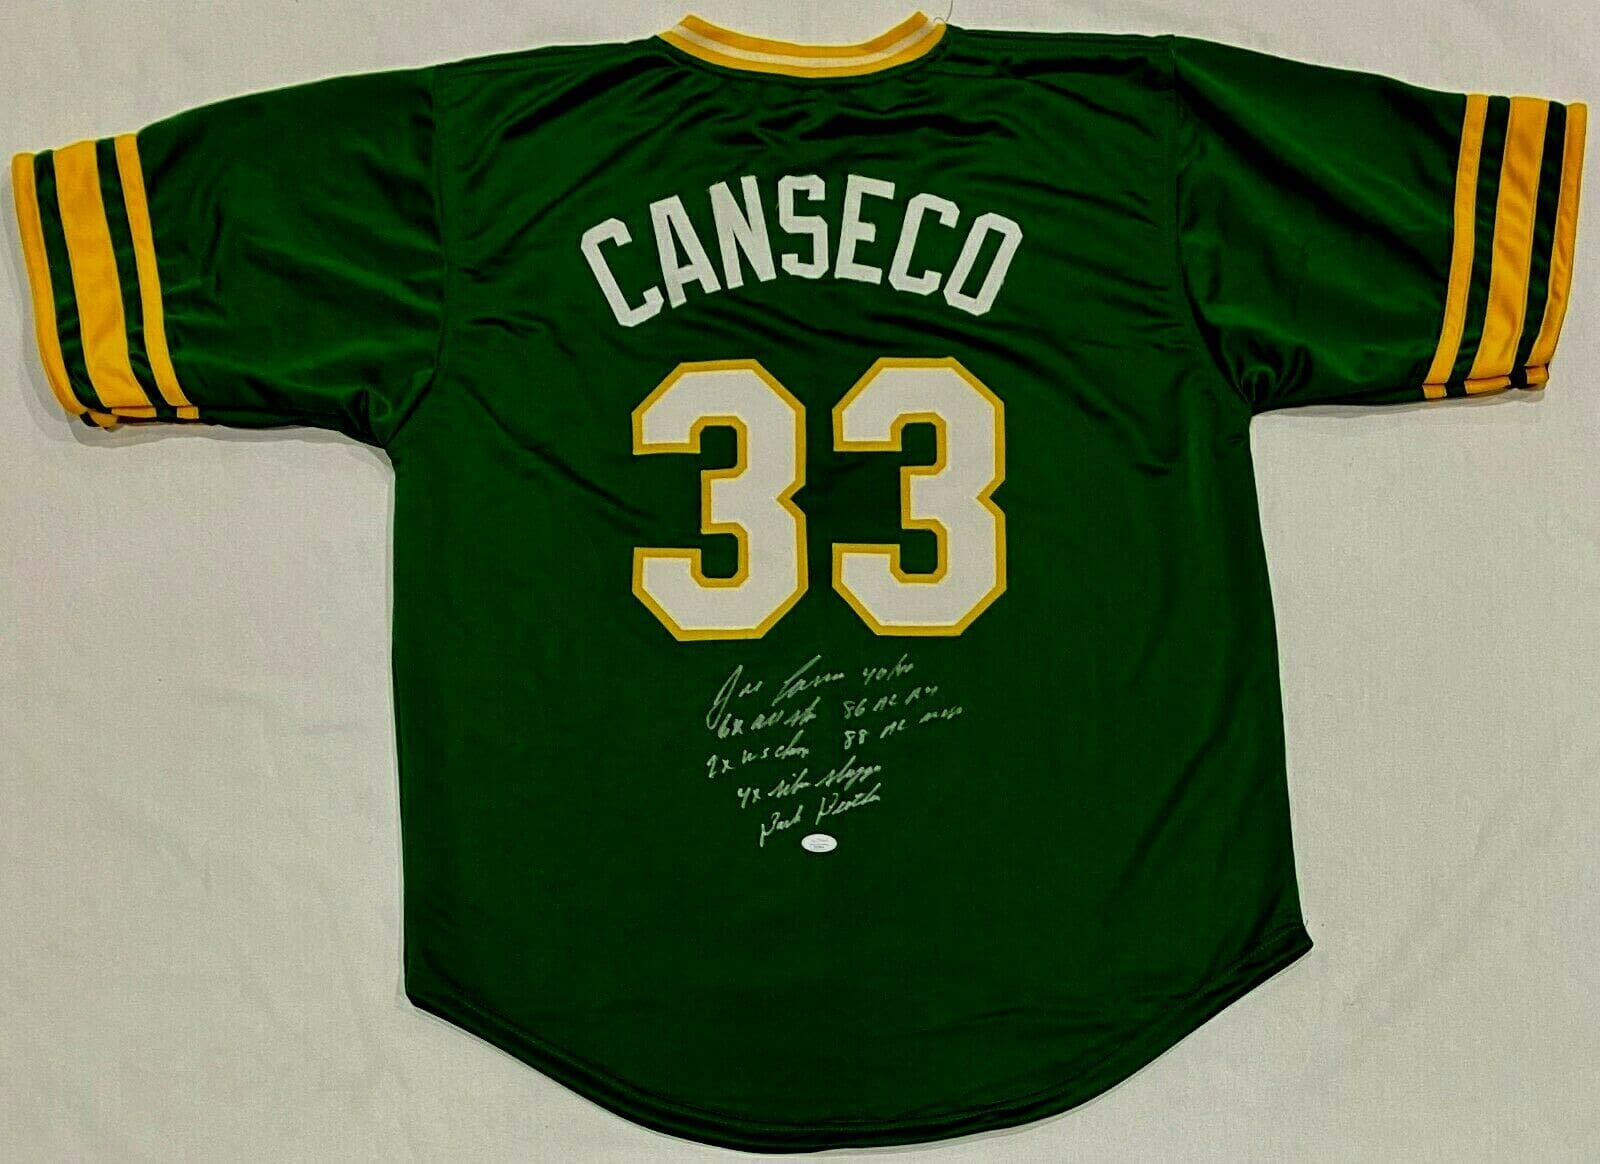 Jose Canseco Signed Autographed Green Jersey FSG Authenticated 7  Inscriptions